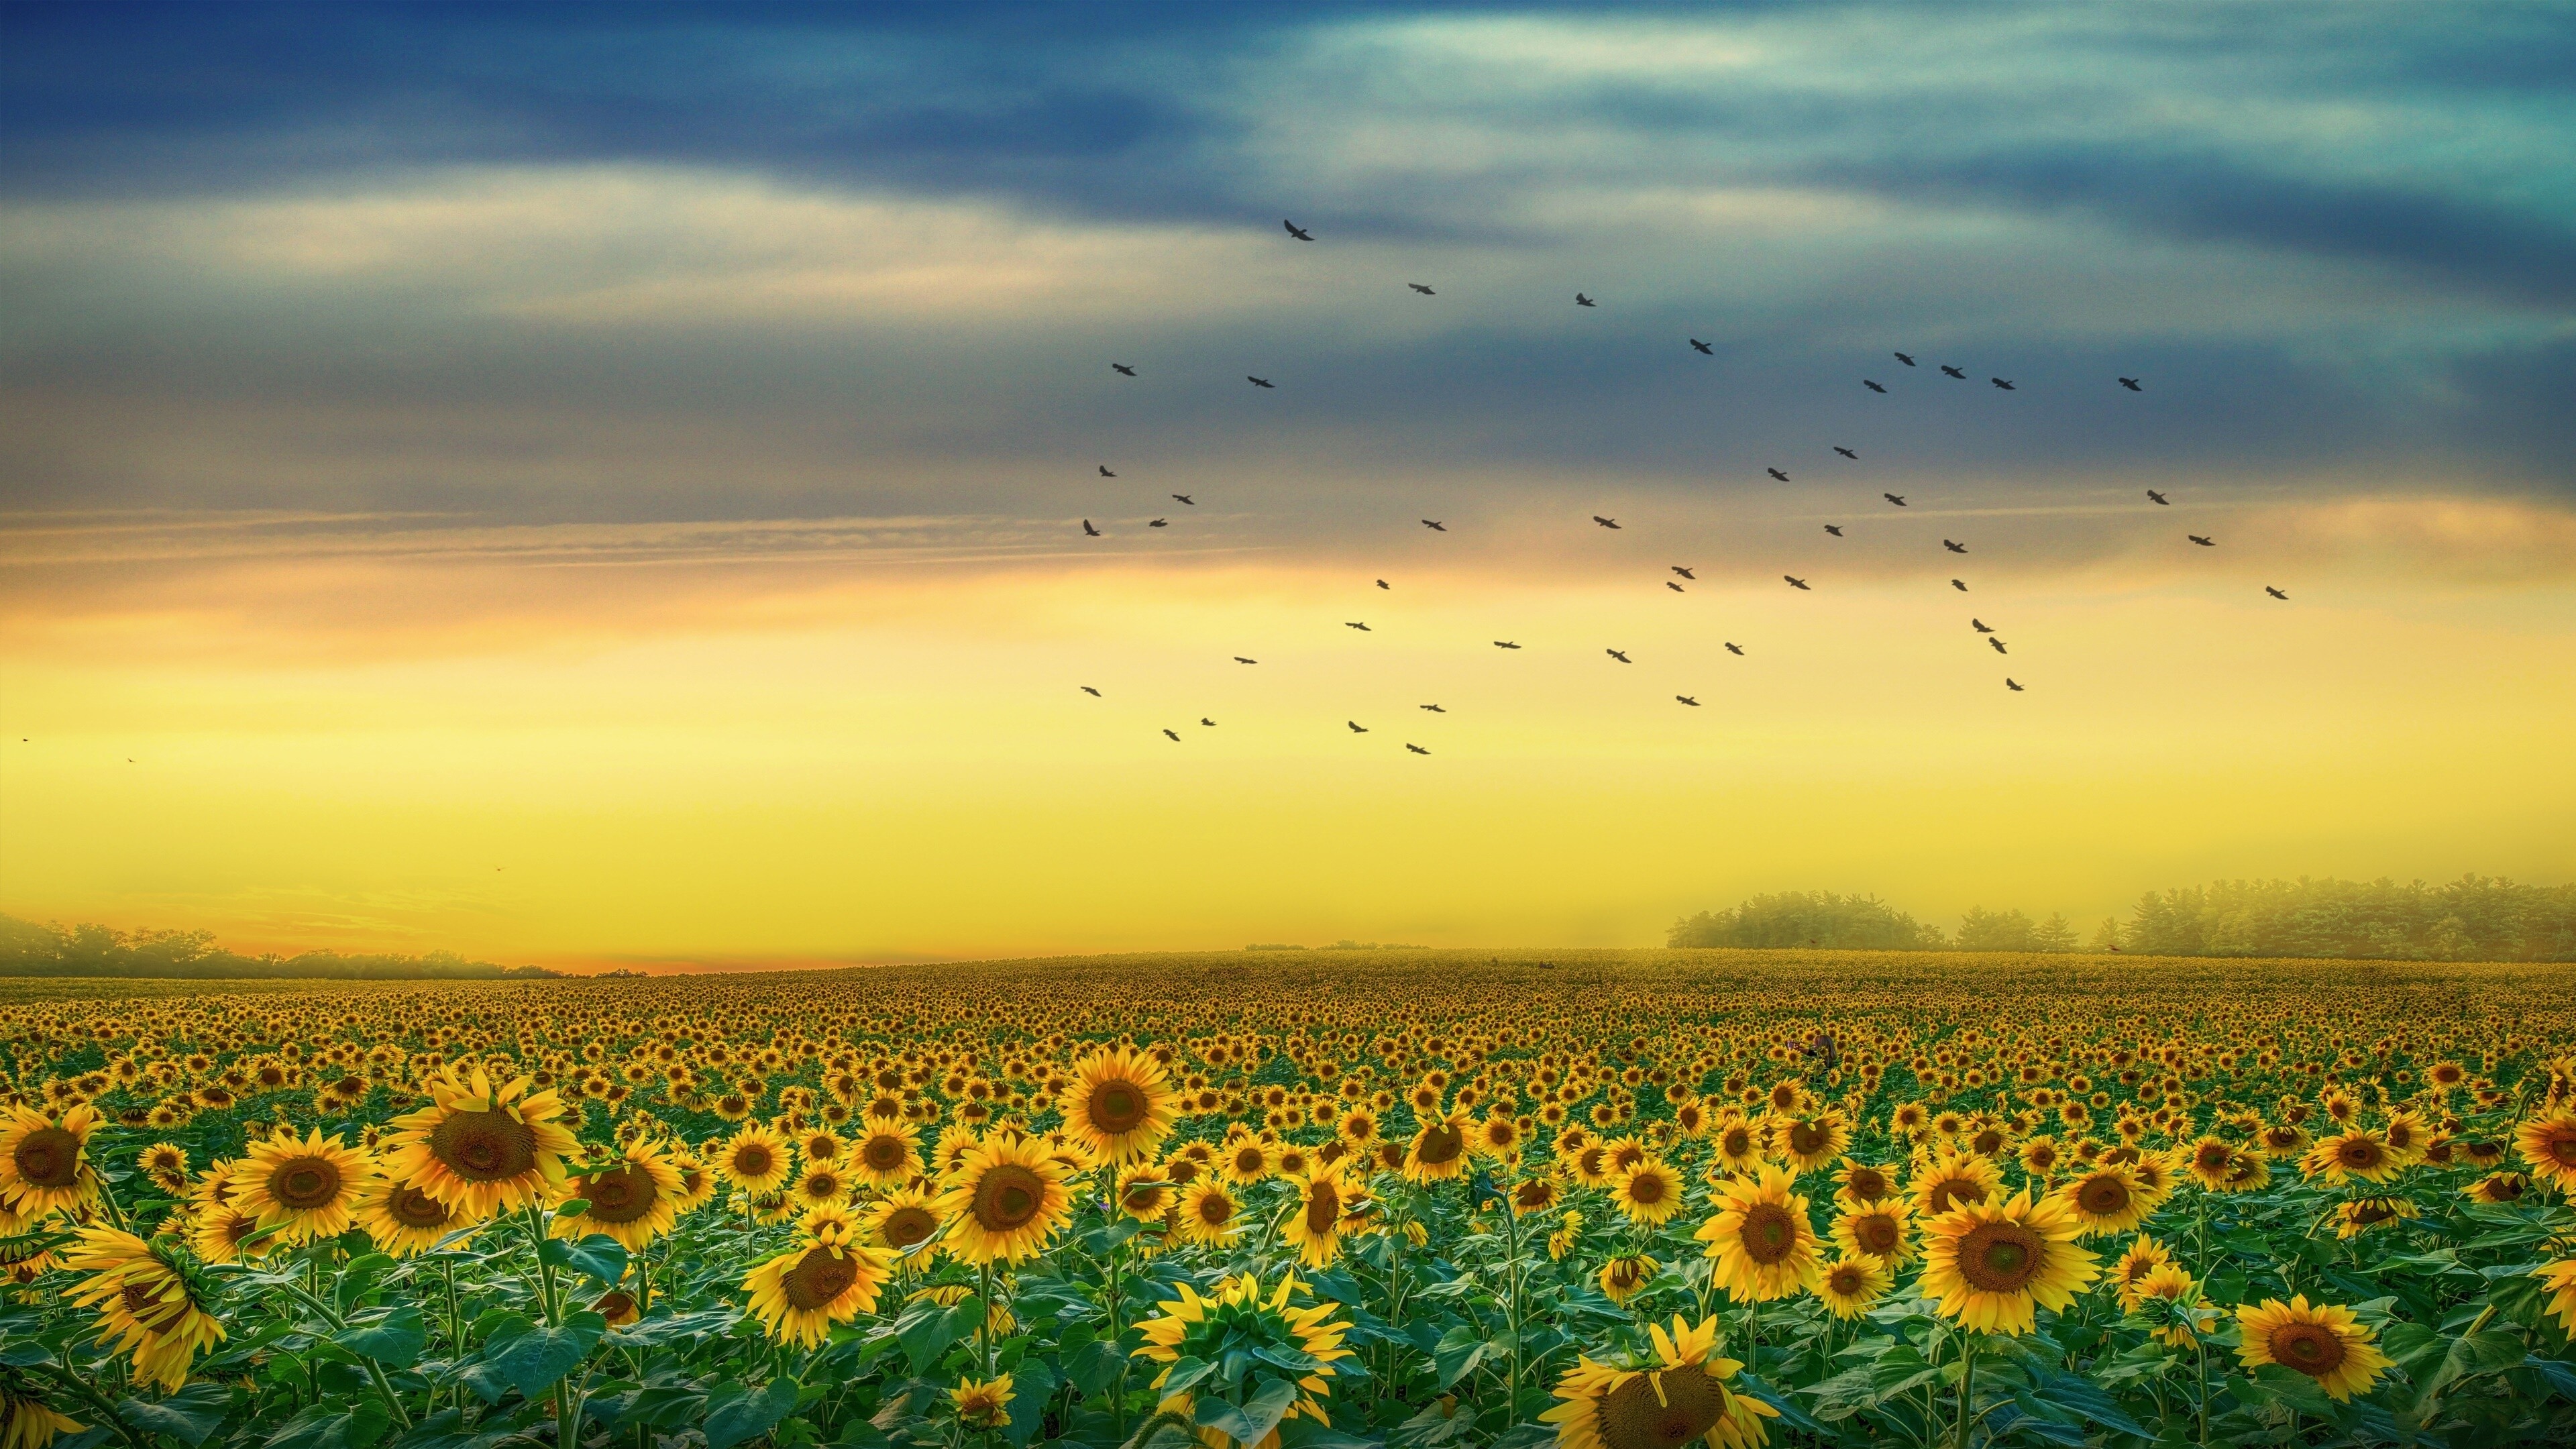 Sunflower: Apart from cooking oil production, it is also used as livestock forage, as bird food, in some industrial applications, and as an ornamental in domestic gardens. 3840x2160 4K Wallpaper.